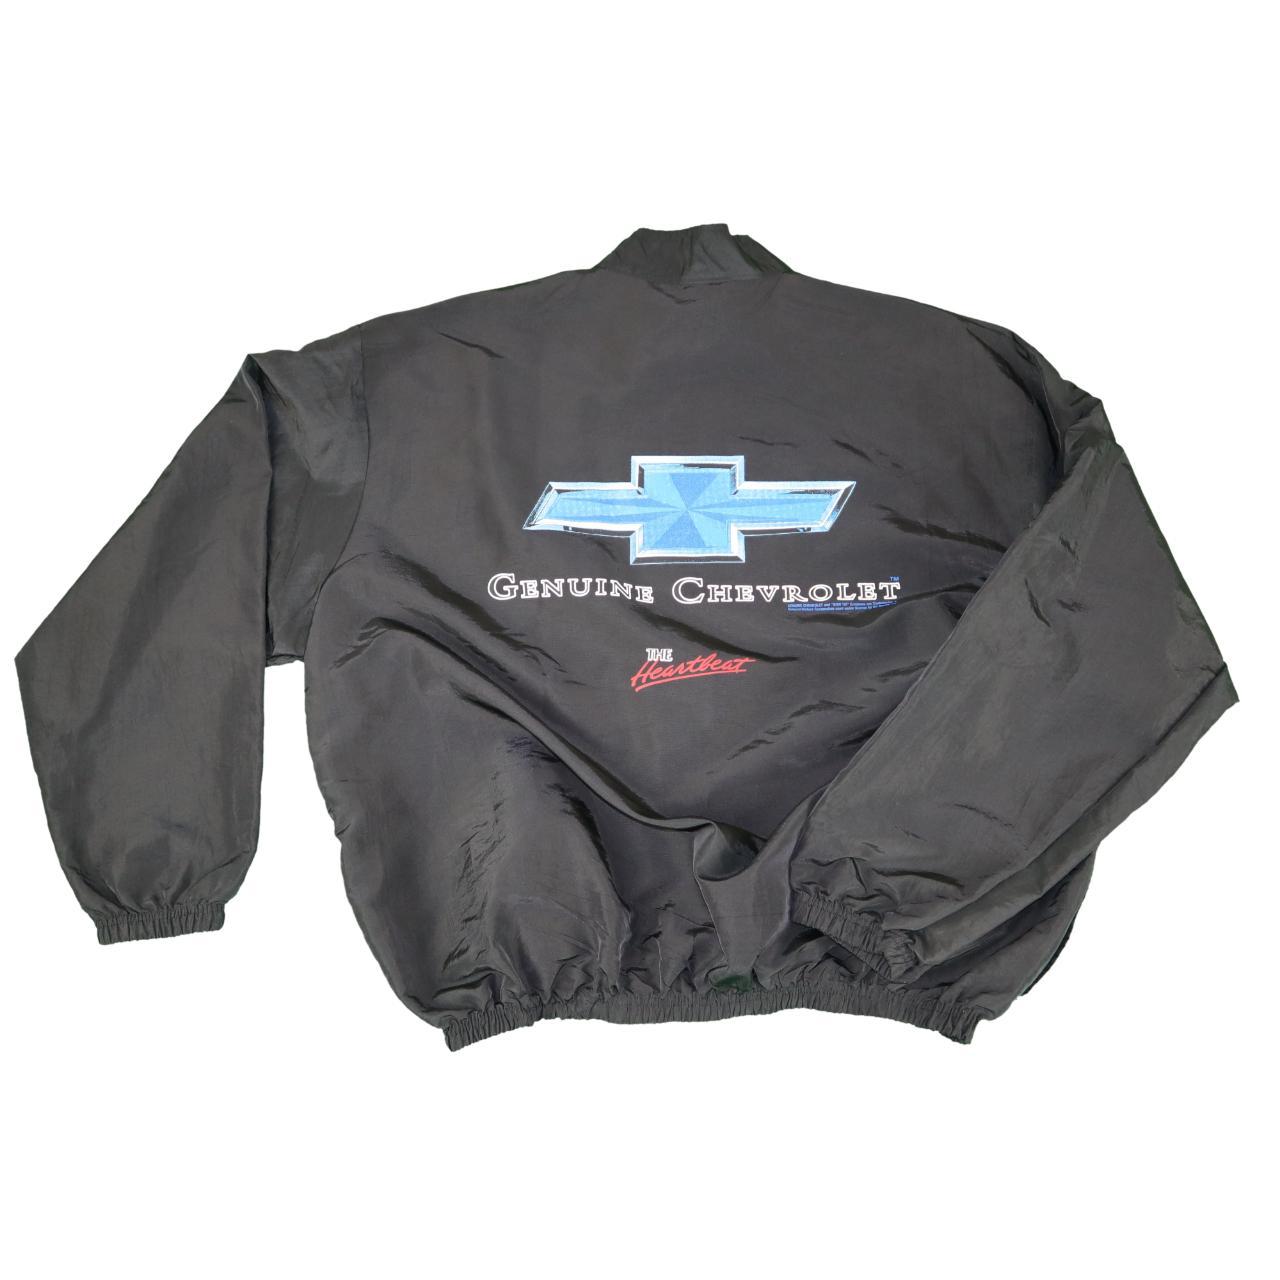 Product Image 2 - Vintage Surf Style Chevrolet pullover